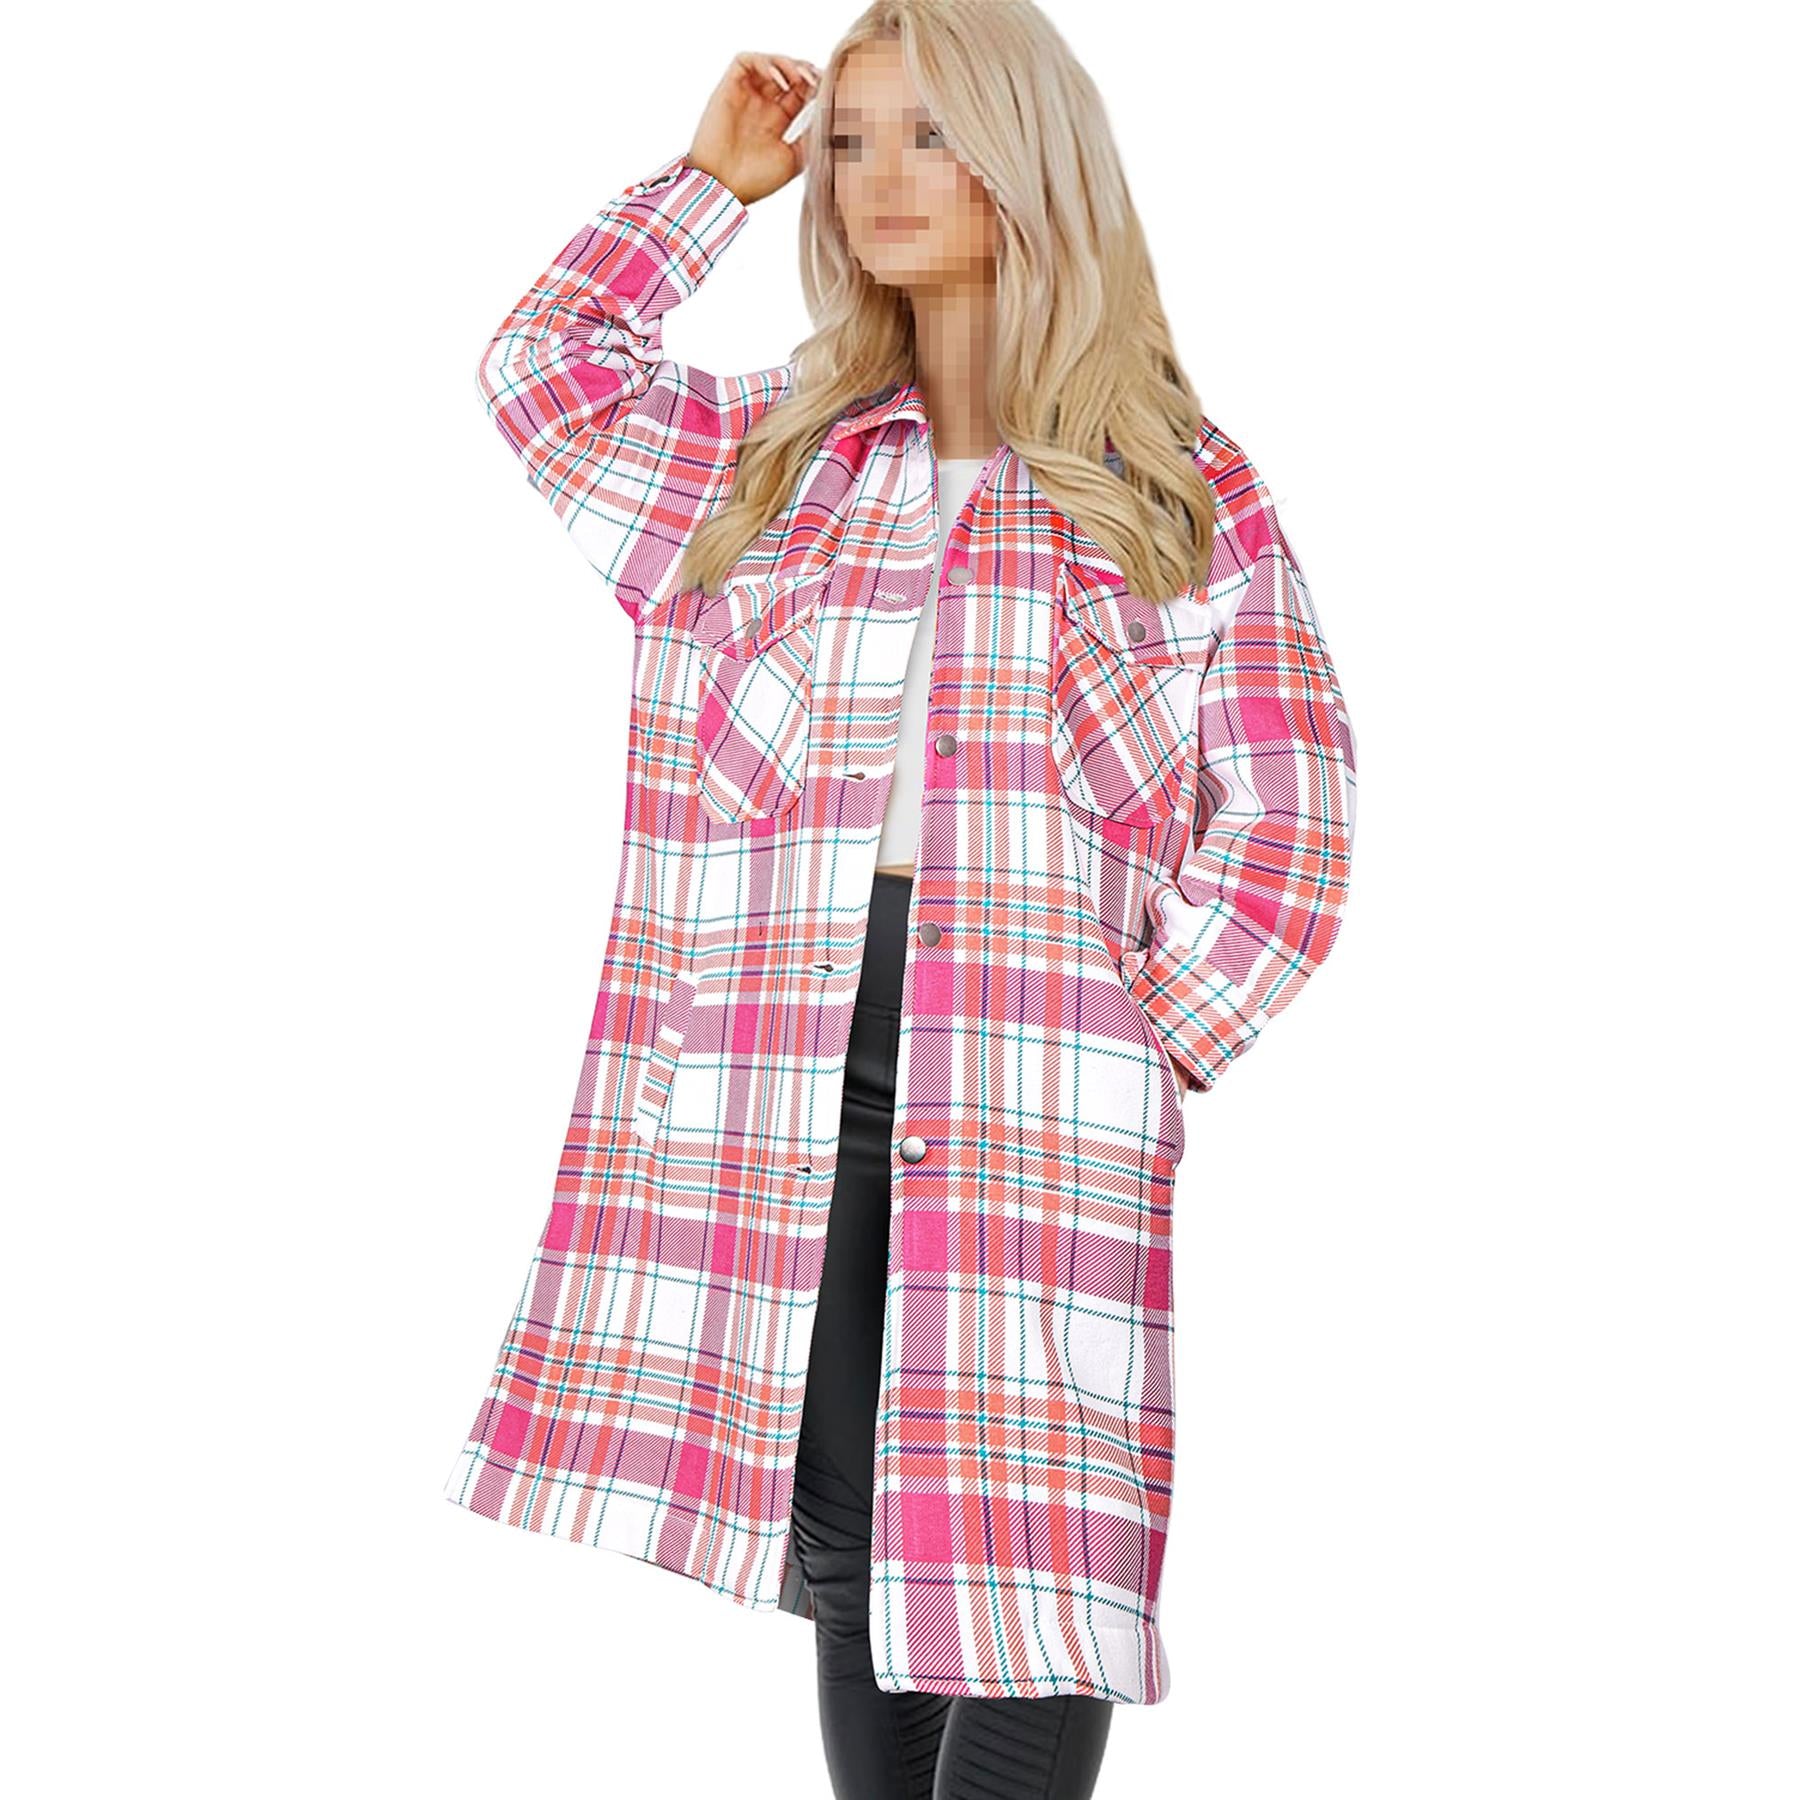 Ladies Longline Shacket Checked Button Down Shirt Jacket